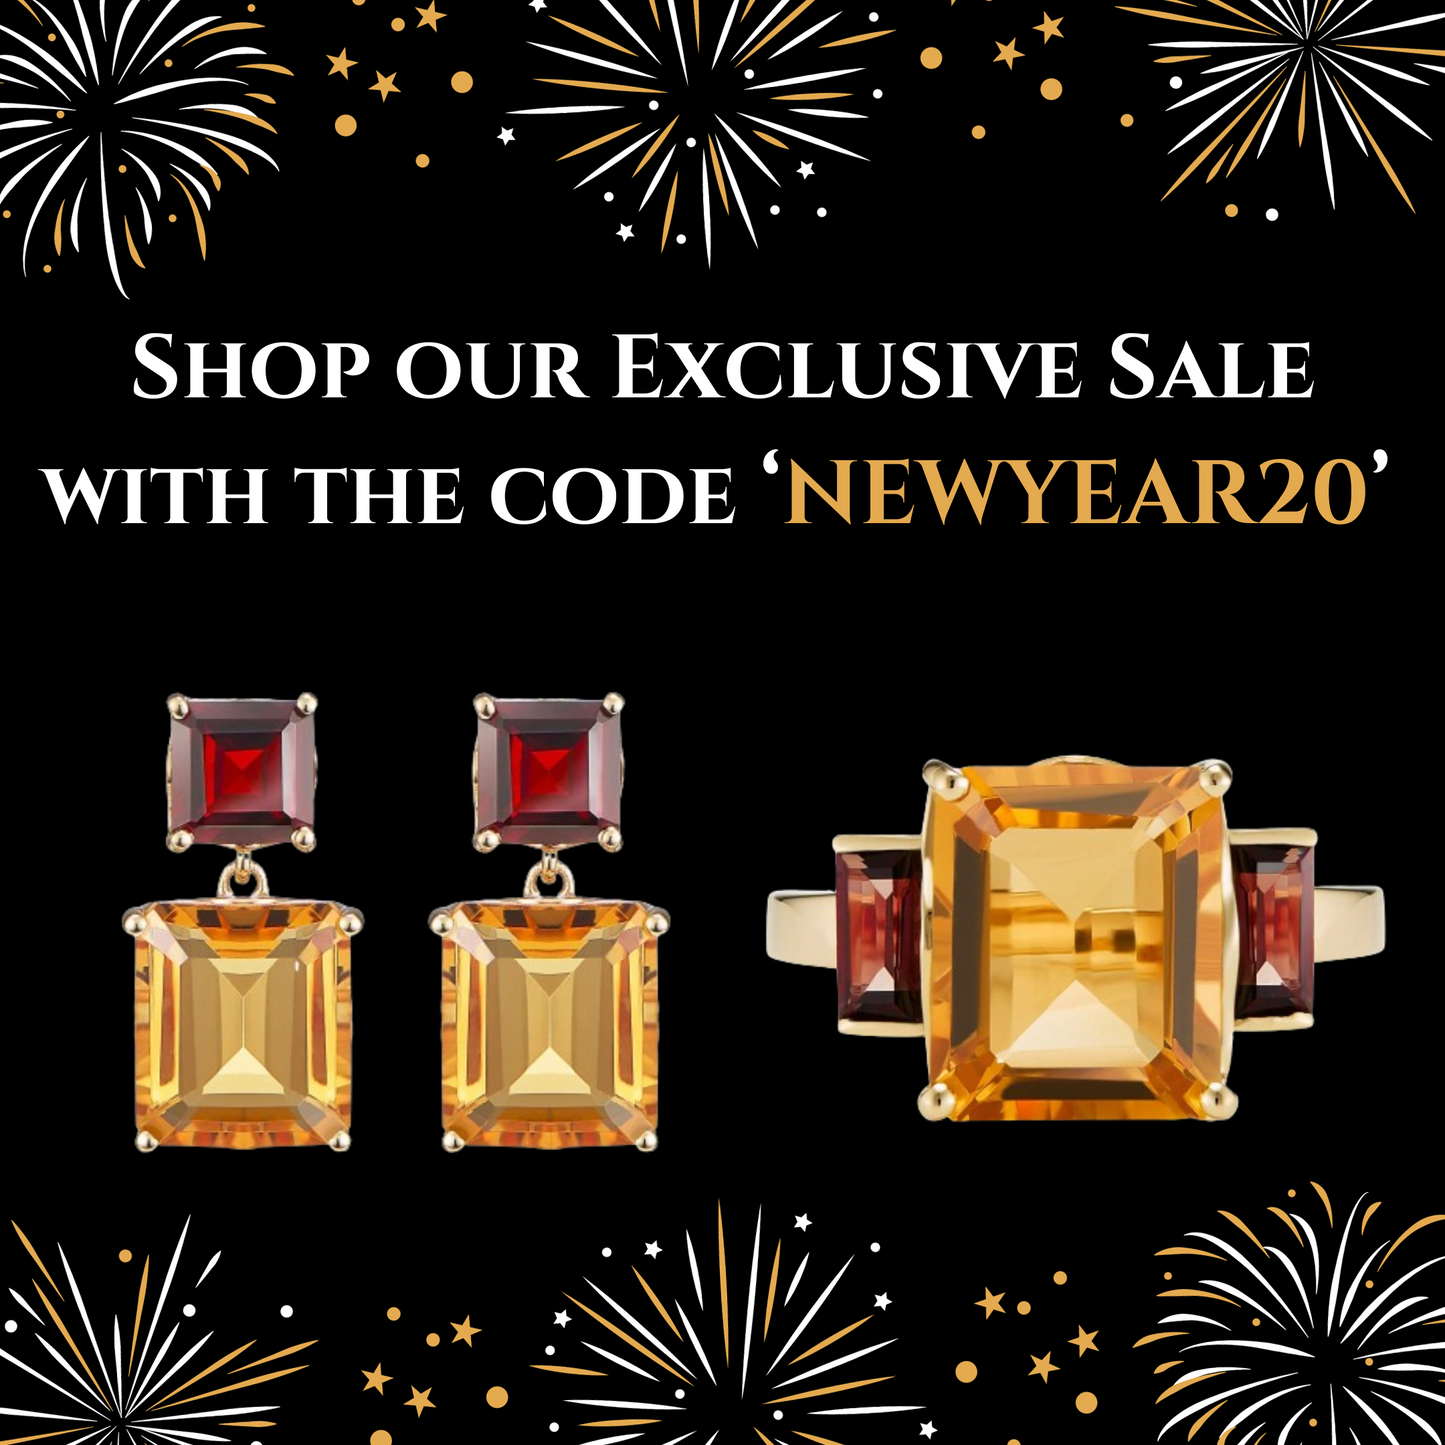 Extending our New Year's Sale!